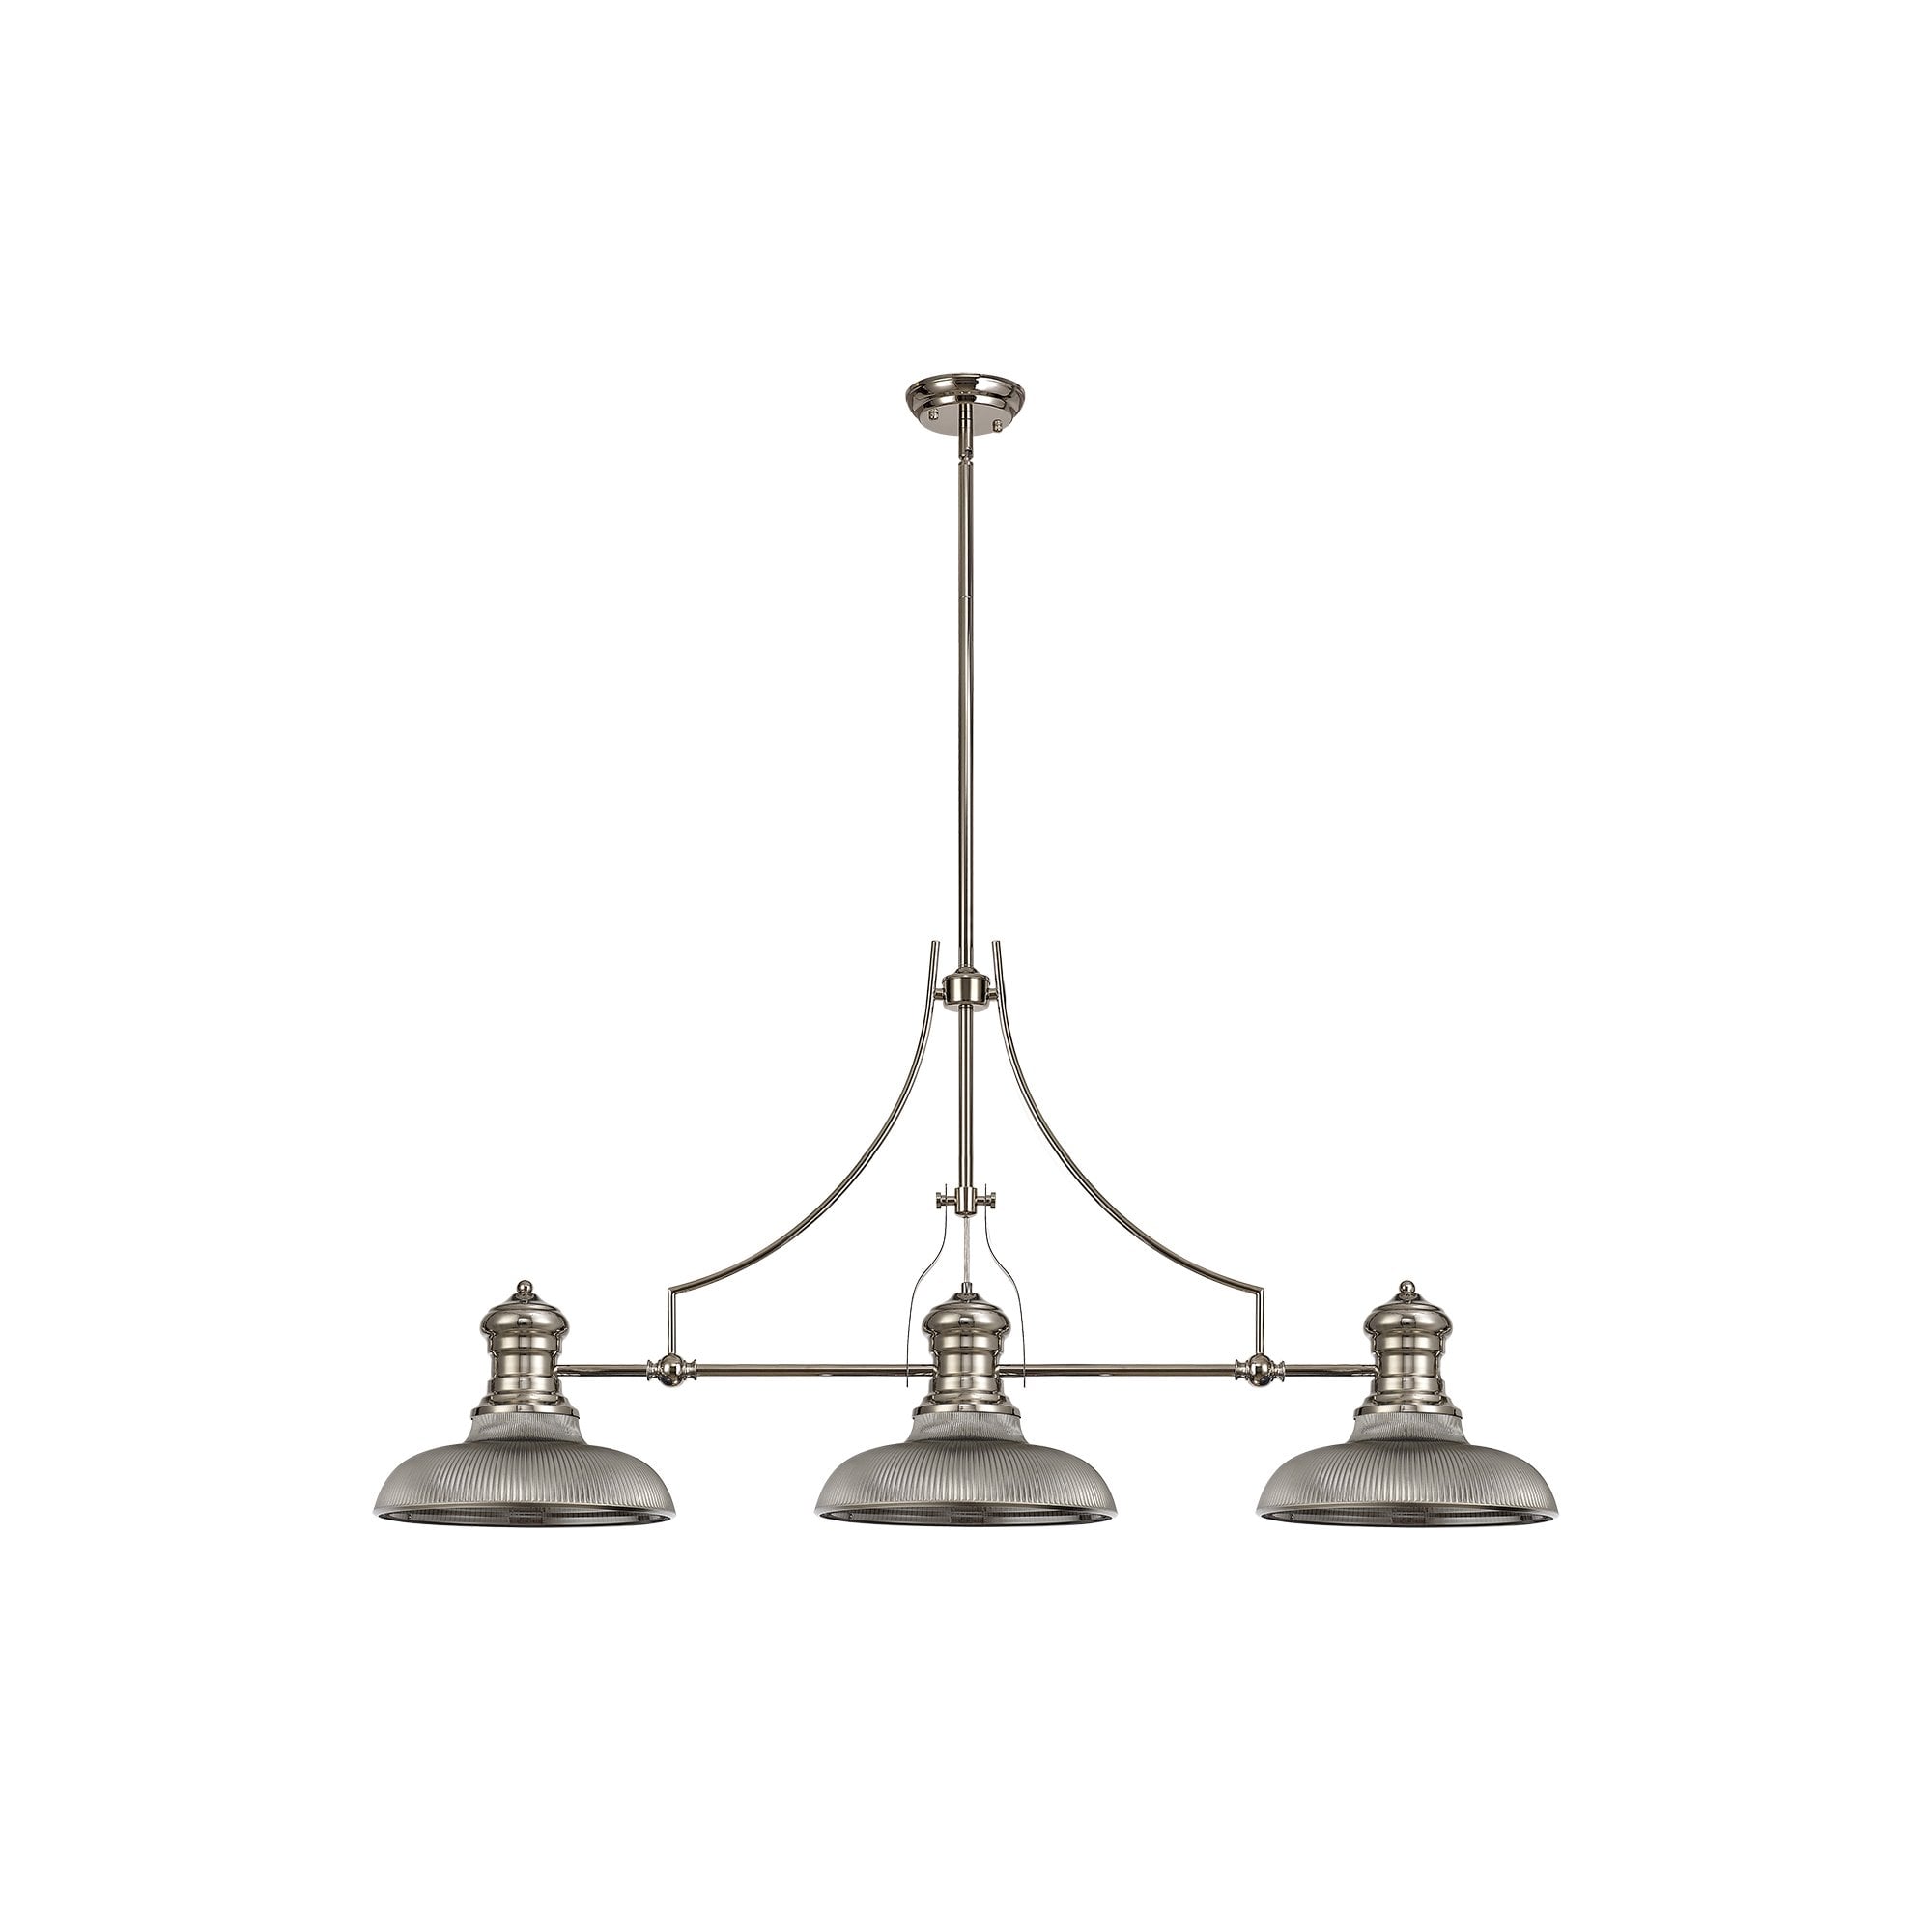 3 Light Telescopic Pendant E27 With 30cm Round Glass Shade, Polished Nickel/Smoked